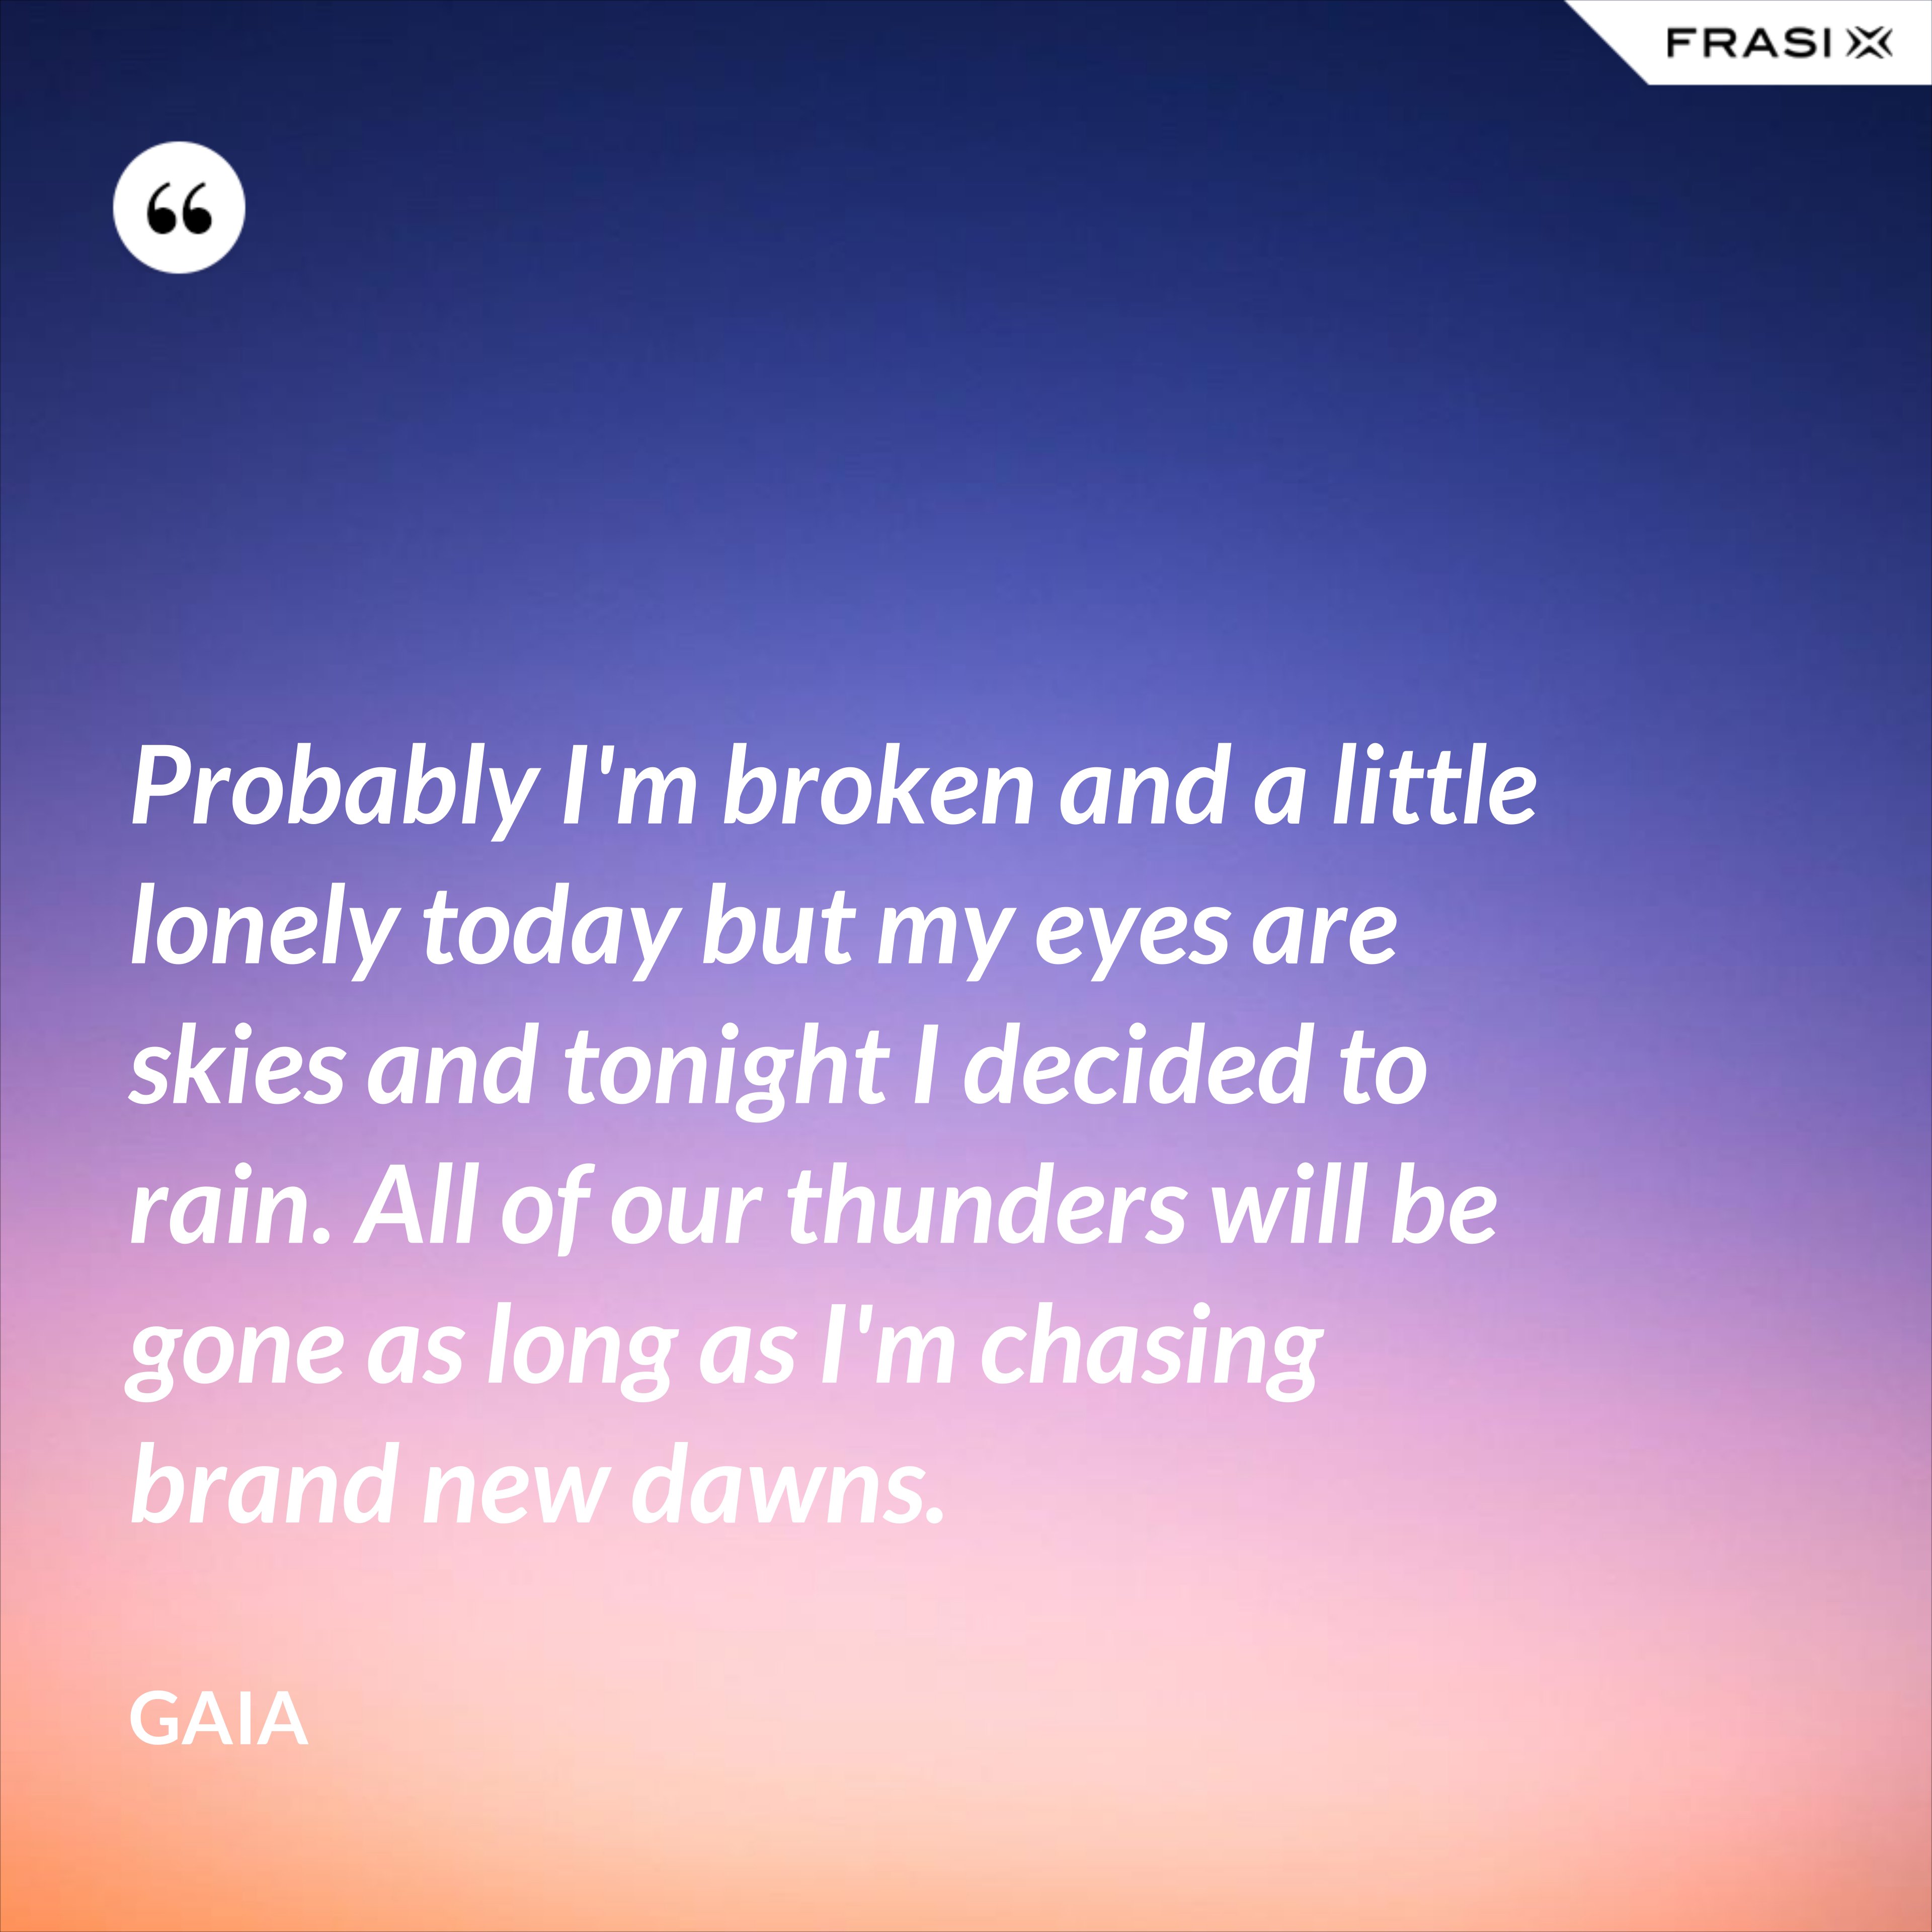 Probably I'm broken and a little lonely today but my eyes are skies and tonight I decided to rain. All of our thunders will be gone as long as I'm chasing brand new dawns. - Gaia